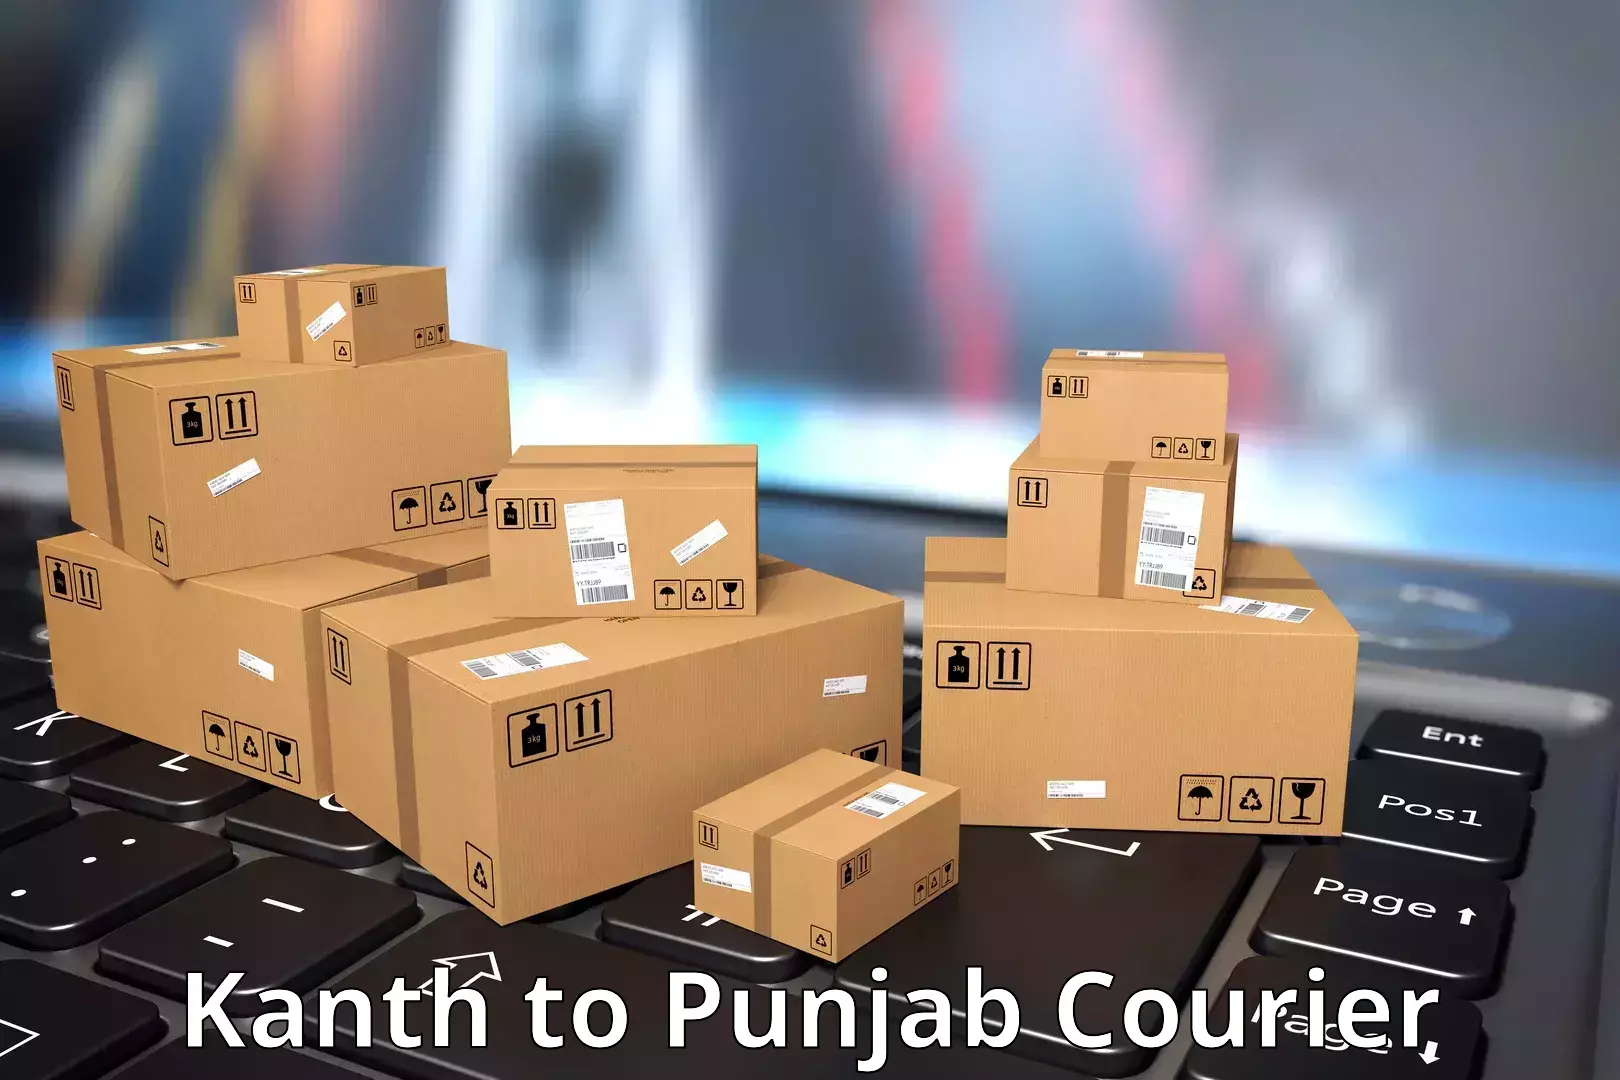 Parcel handling and care Kanth to Ajnala